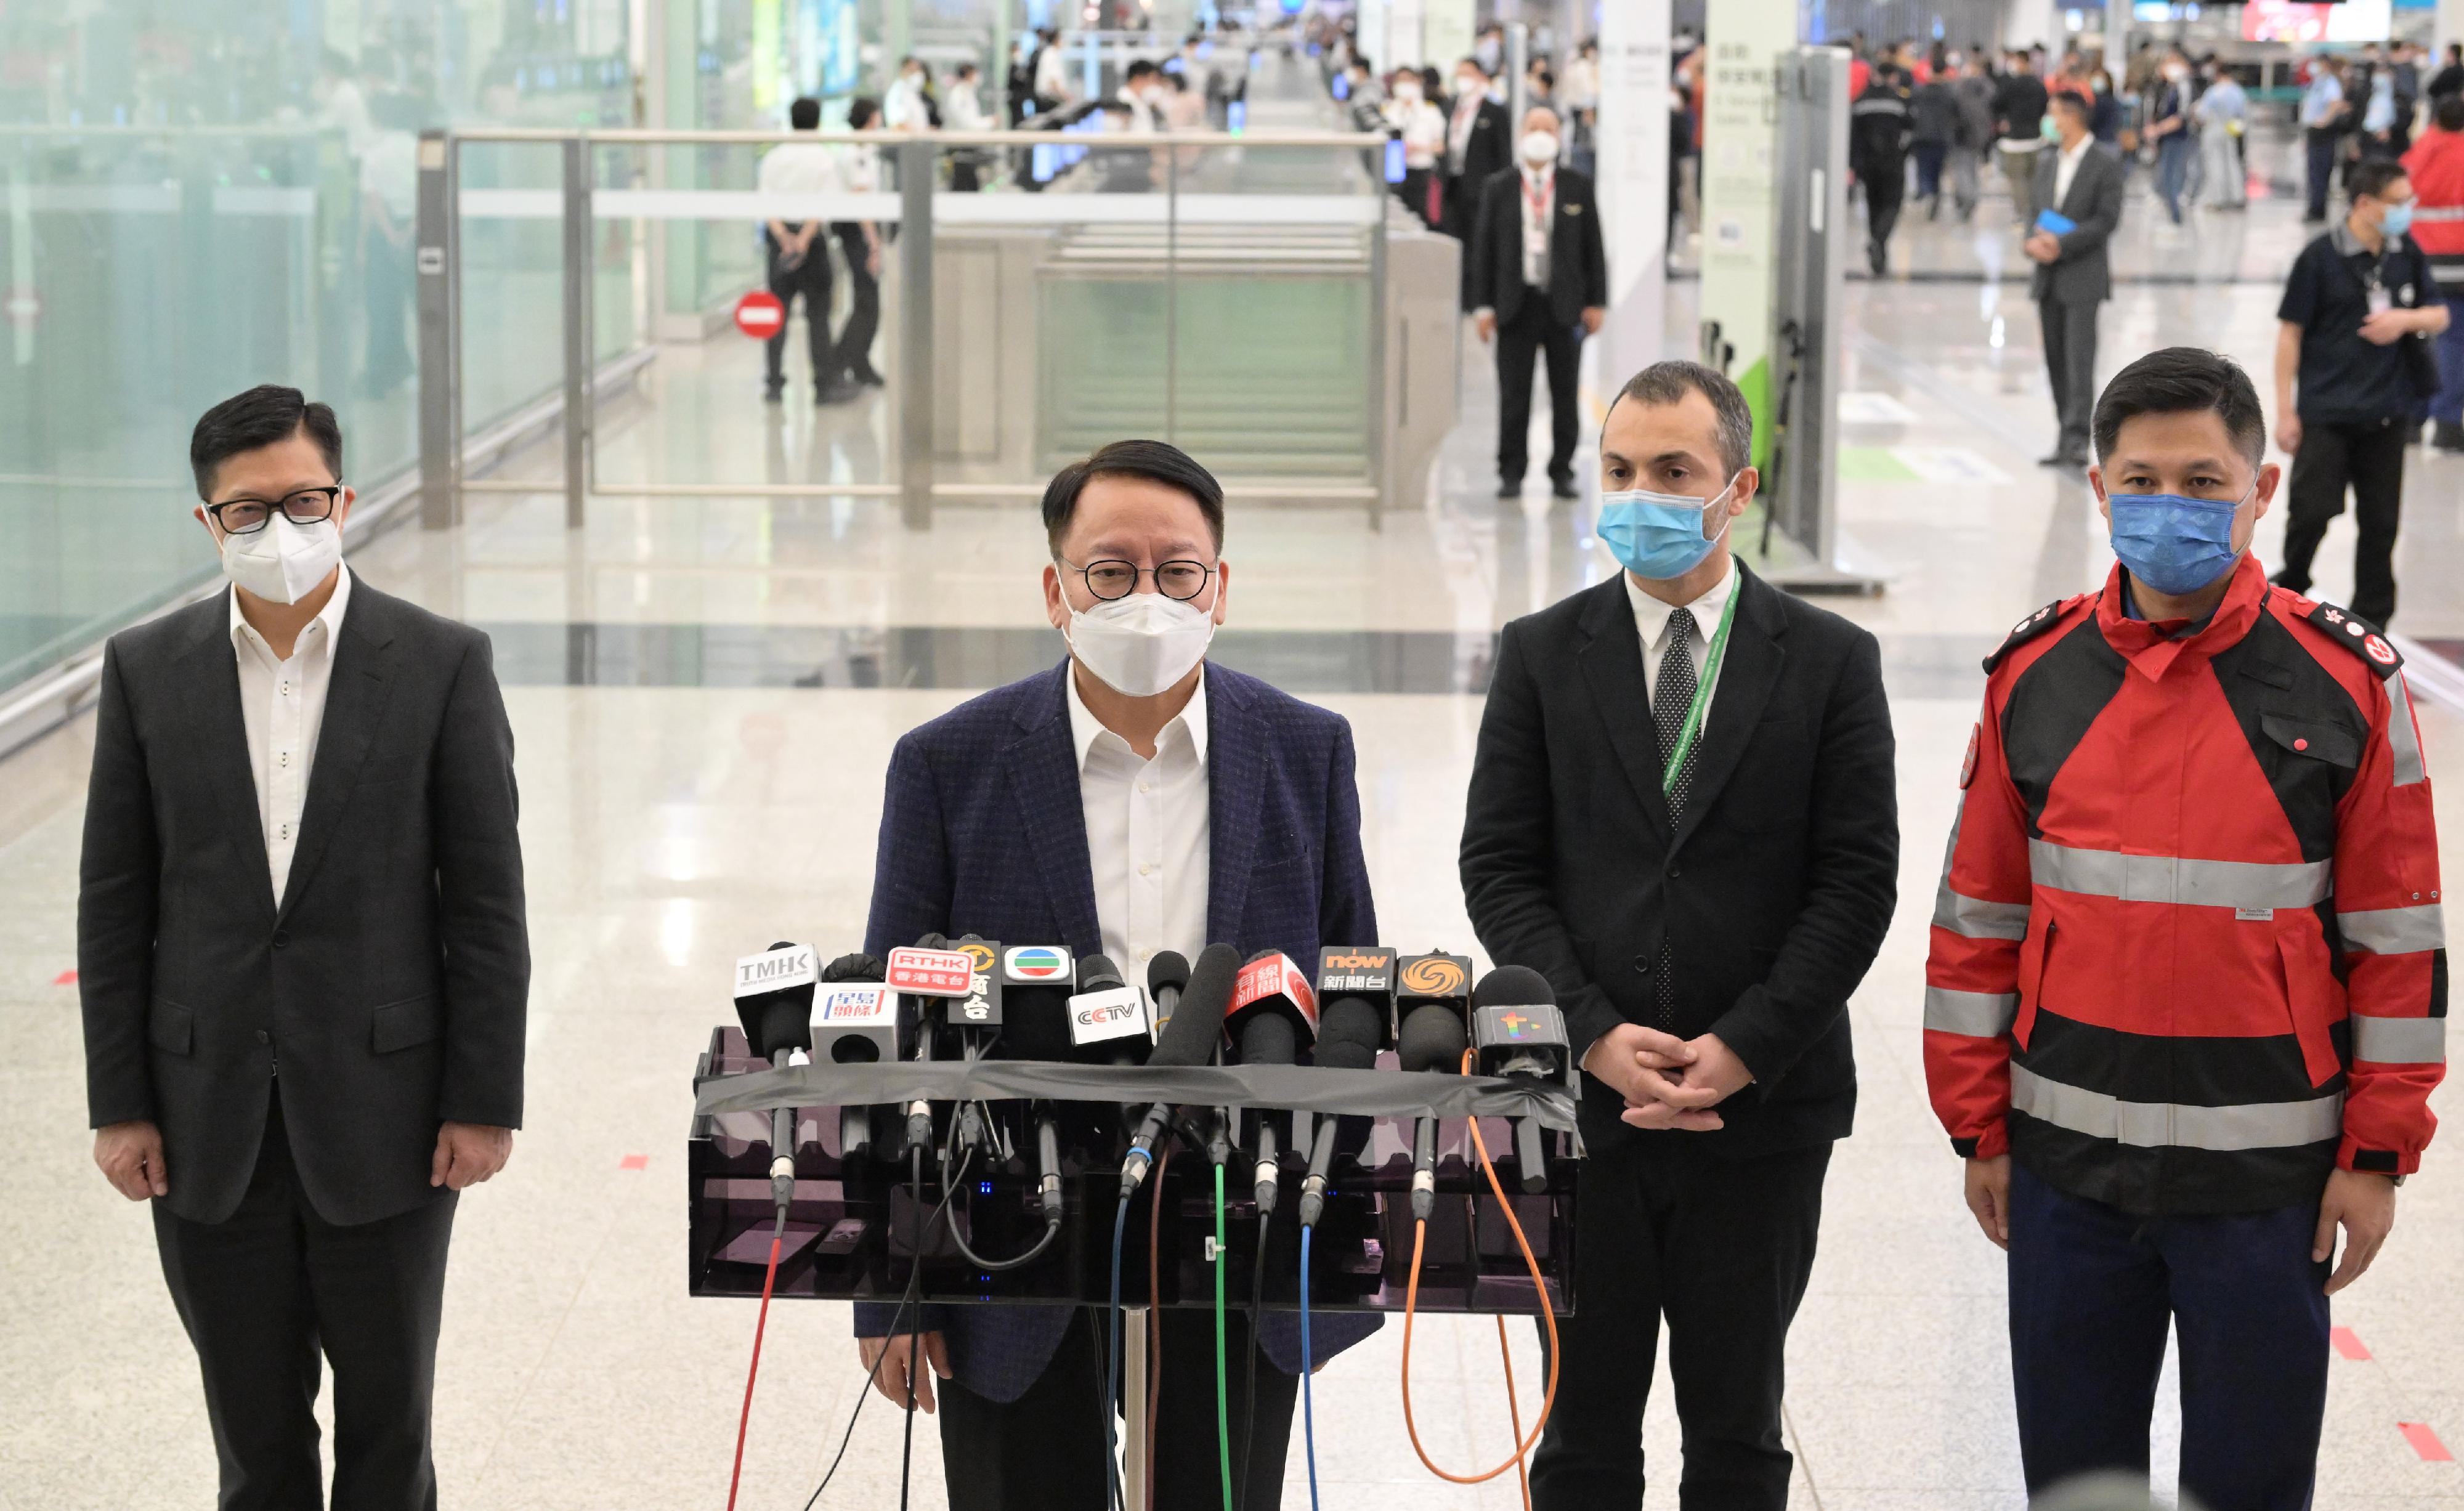 The Hong Kong Special Administrative Region Government sent a 59-strong search and rescue team to the quake-stricken areas in Türkiye tonight (February 8) to assist in the search and rescue work. Photo shows the Acting Chief Executive, Mr Chan Kwok-ki (second left) meeting the media.